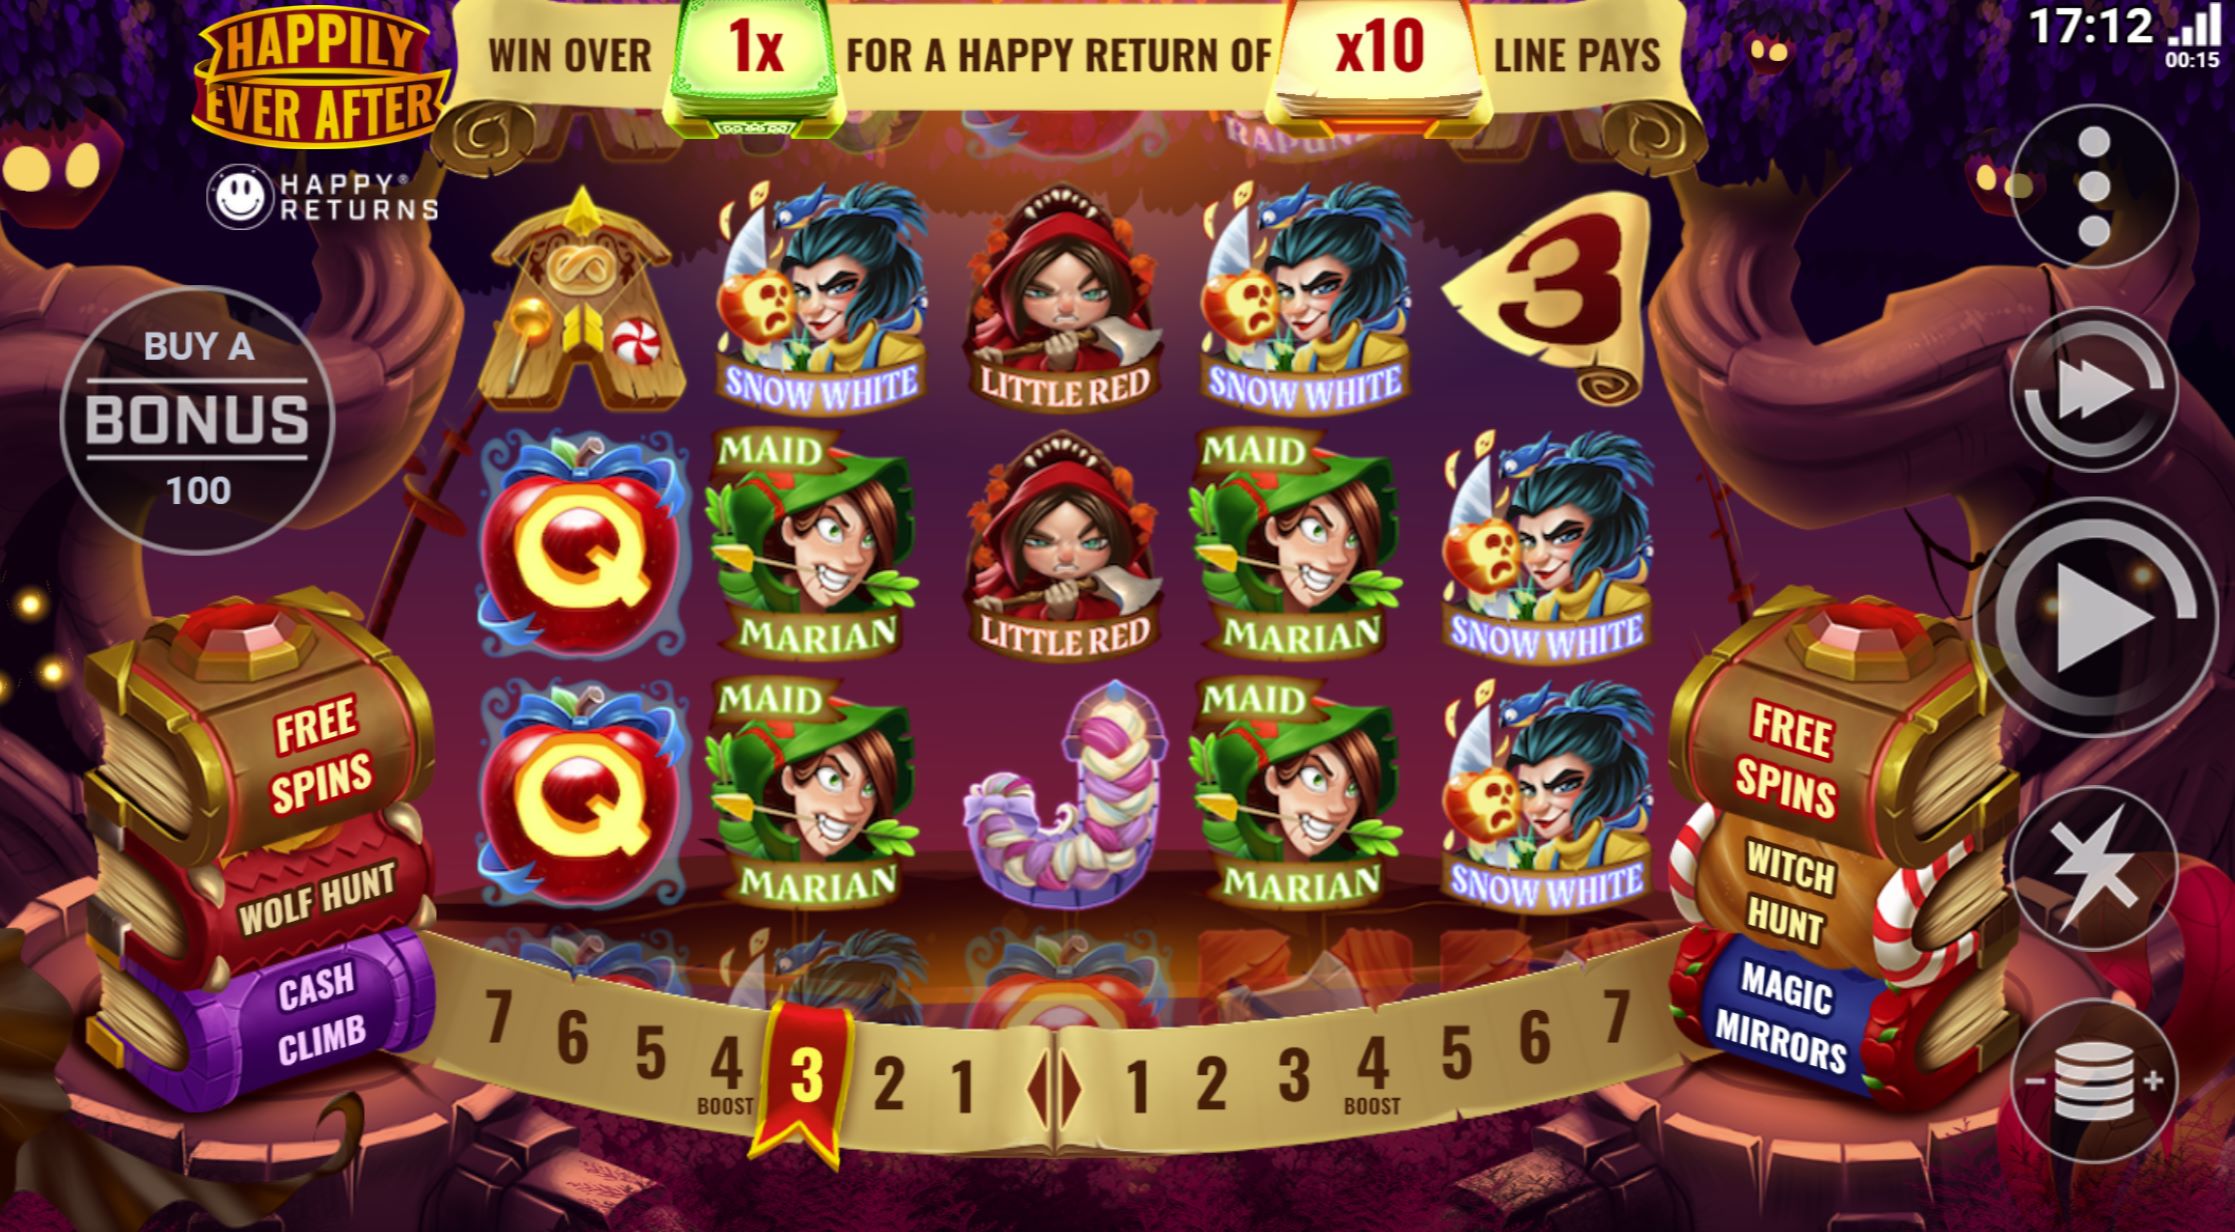 Rogue slots game Happily Ever After